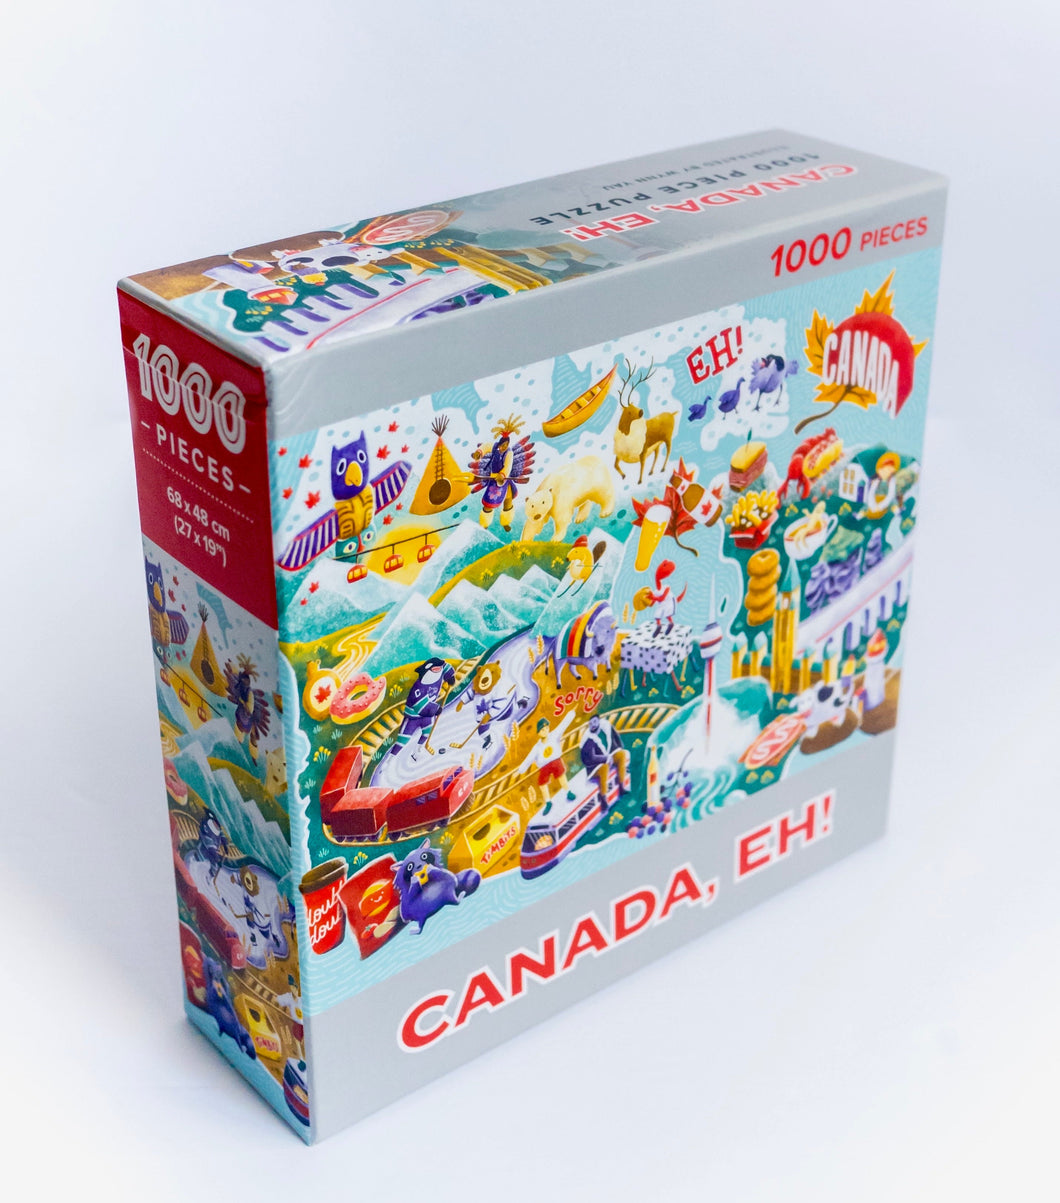 1000pc Canada Eh! Jigsaw Puzzle